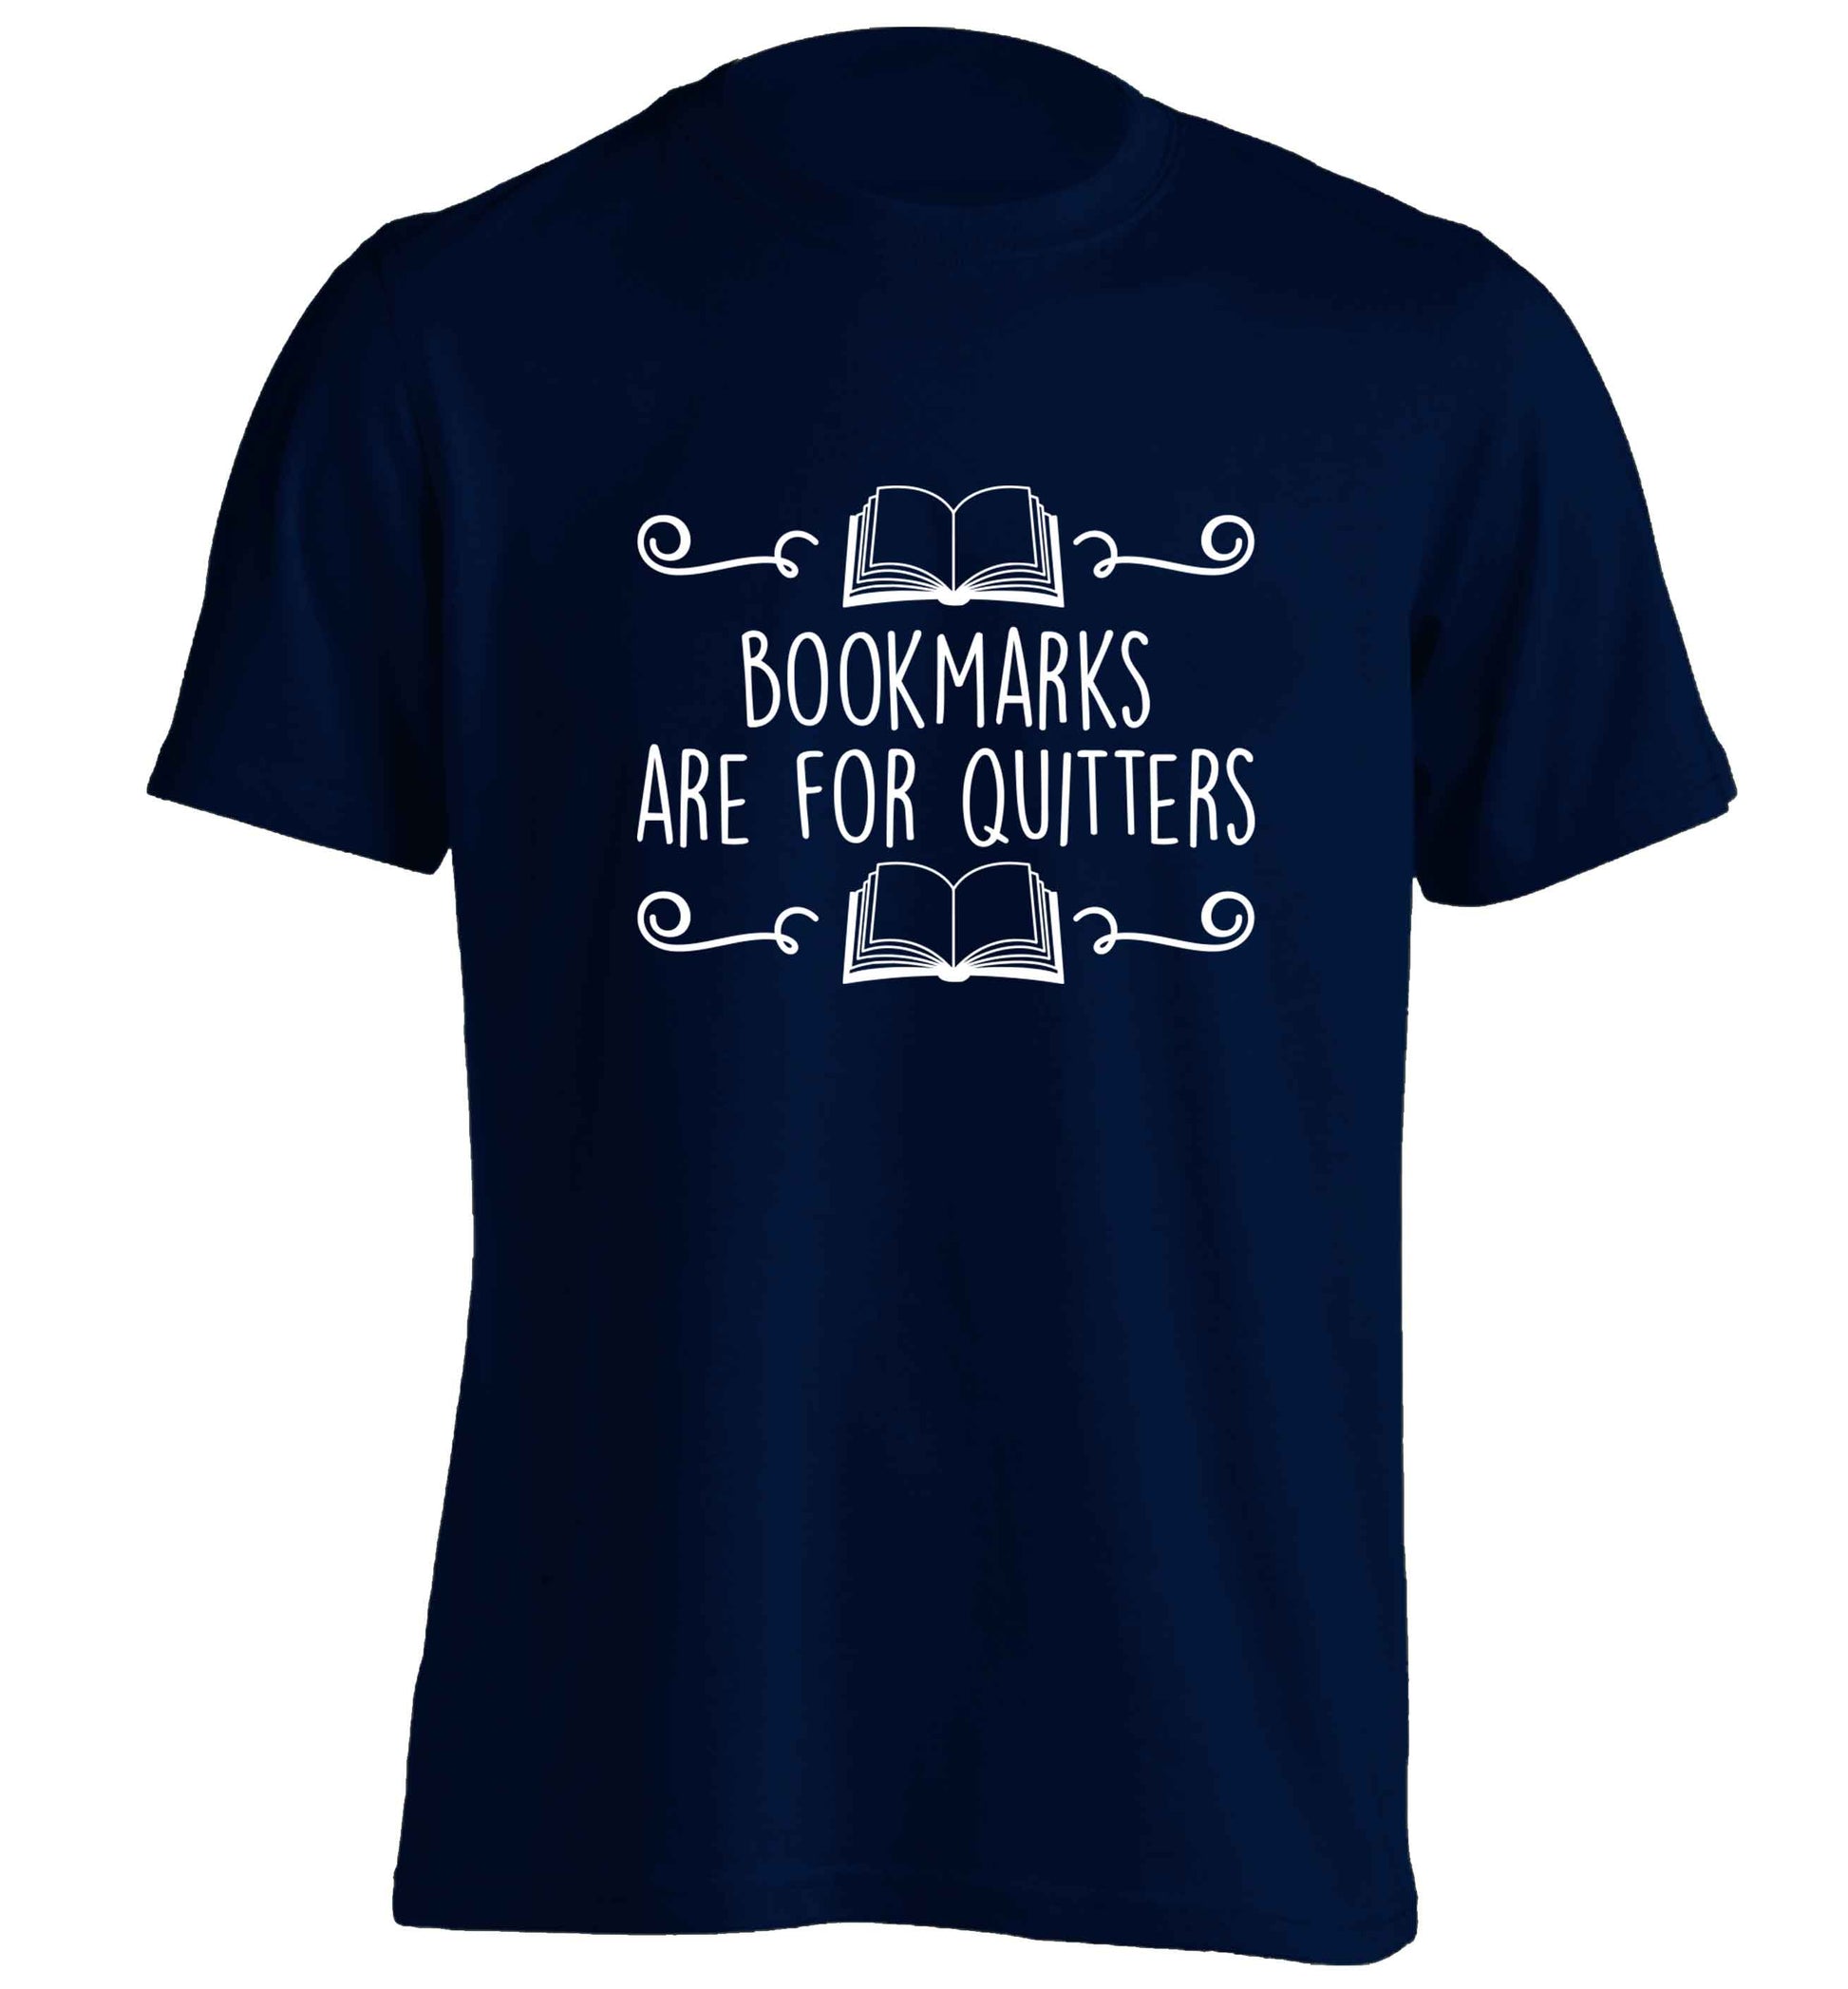 Bookmarks are for quitters adults unisex navy Tshirt 2XL